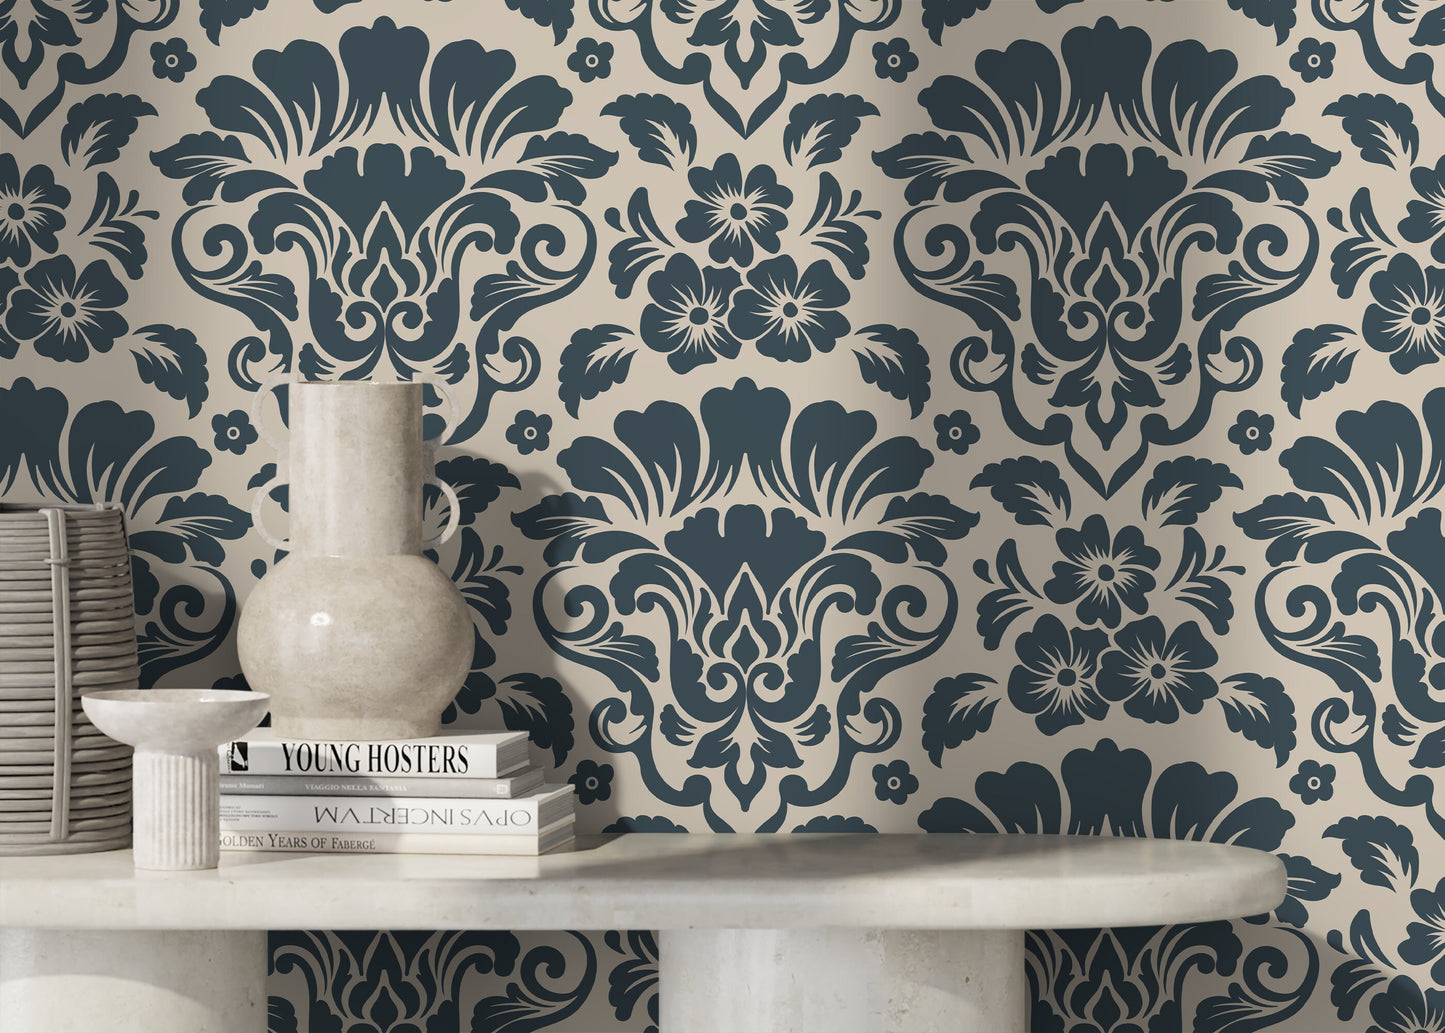 Navy and Beige Damask Wallpaper / Peel and Stick Wallpaper Removable Wallpaper Home Decor Wall Art Wall Decor Room Decor - D217